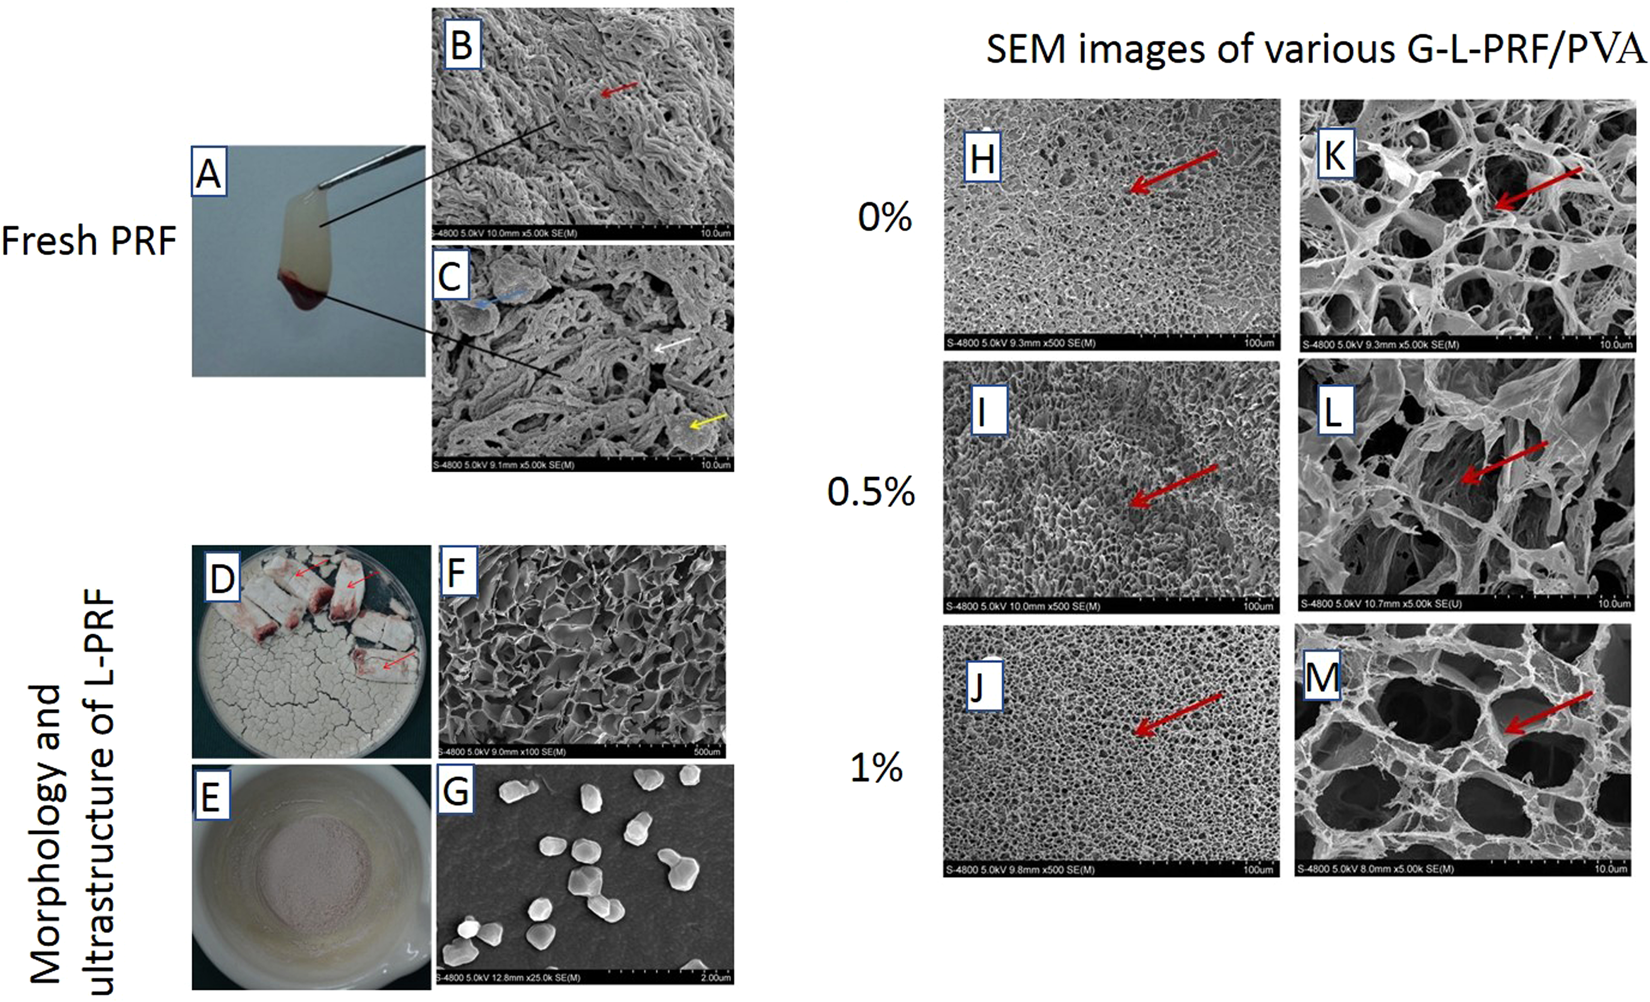 Frontiers  Polyvinyl alcohol coating prevents platelet adsorption and  improves mechanical property of polycaprolactone-based small-caliber  vascular graft